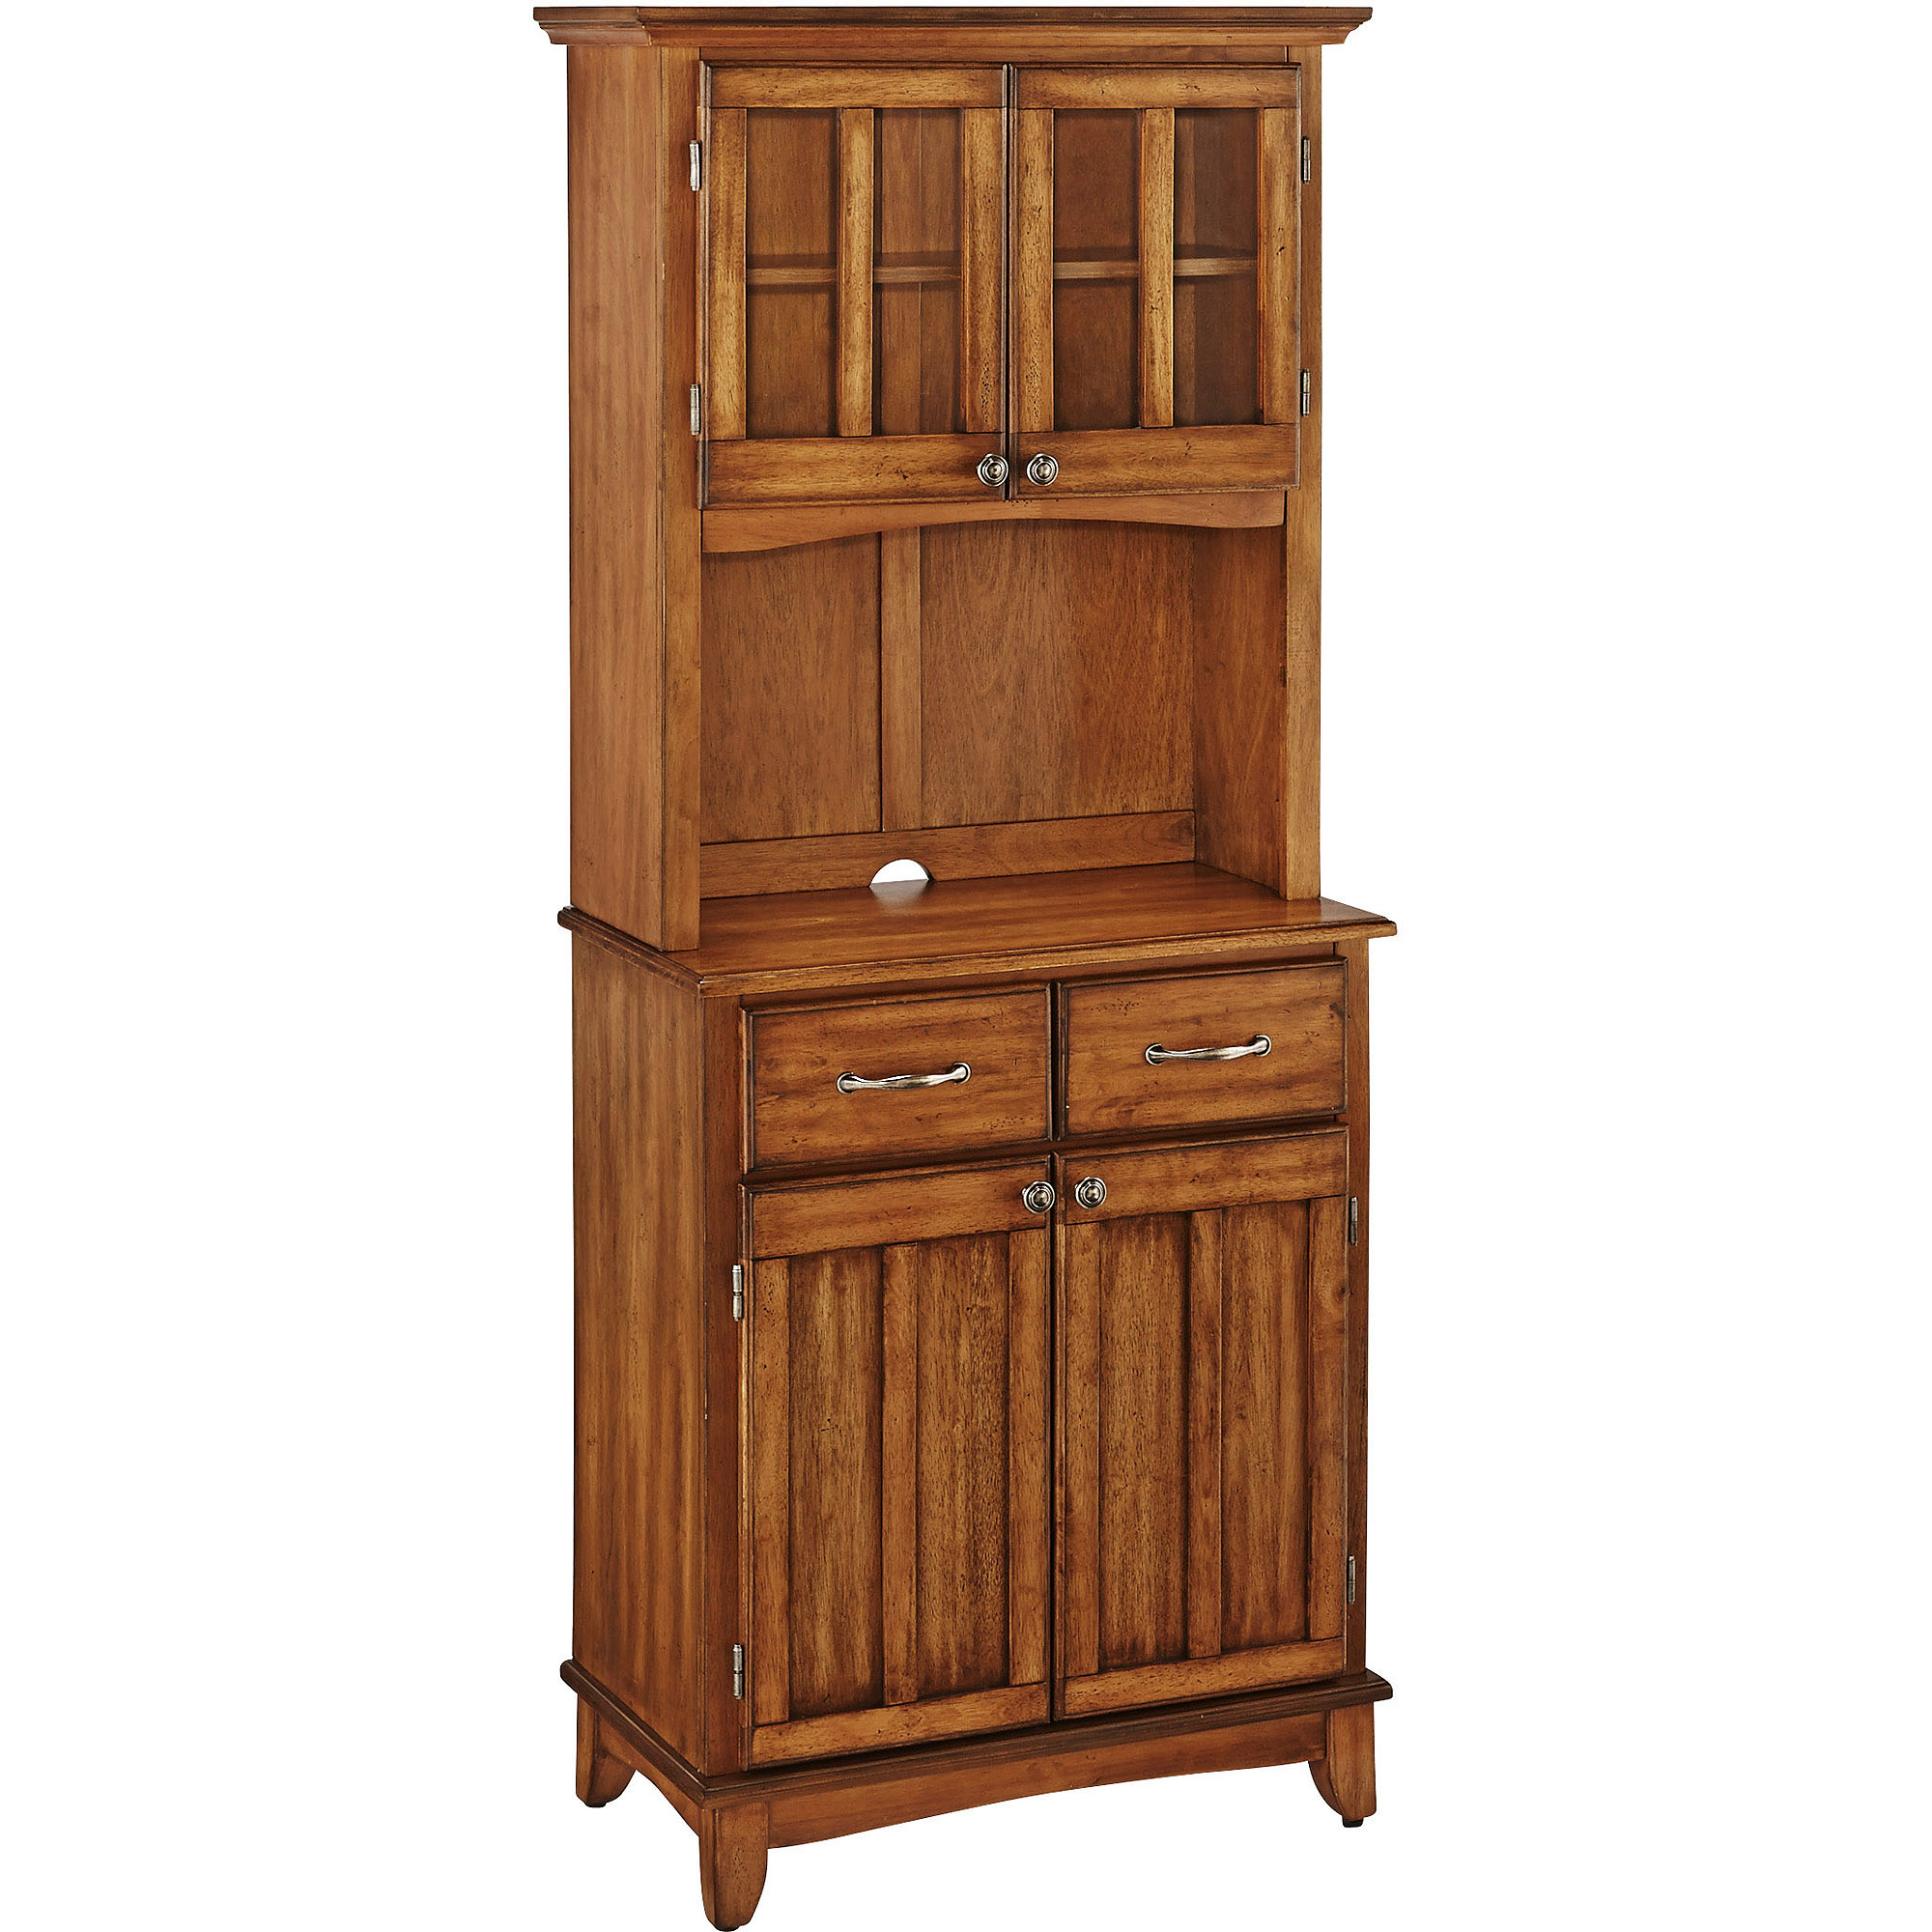 Small Kitchen Buffet Cabinet
 Home Styles Small Buffet With Two Door Hutch Cottage Oak